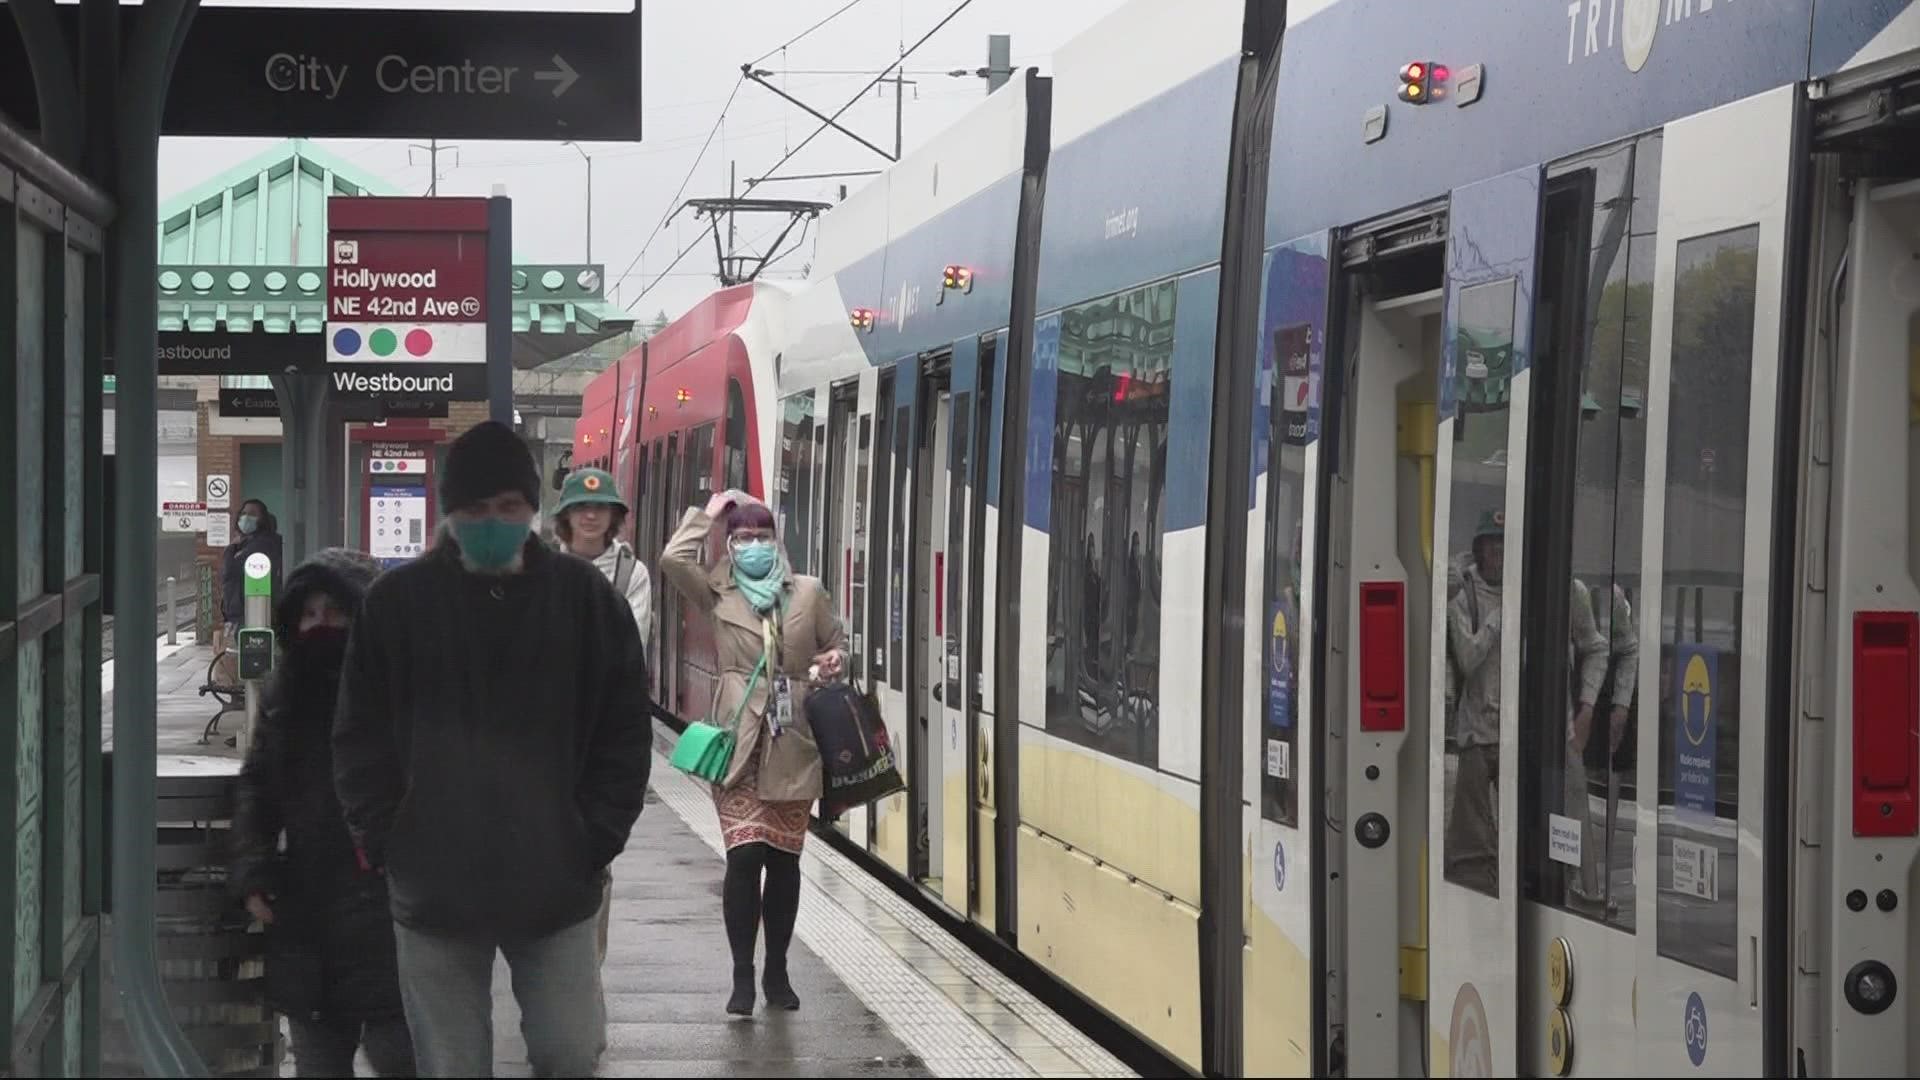 Masks are no longer required on TriMet buses and MAX trains. While it's a sigh of relief for many, others still have safety concerns.